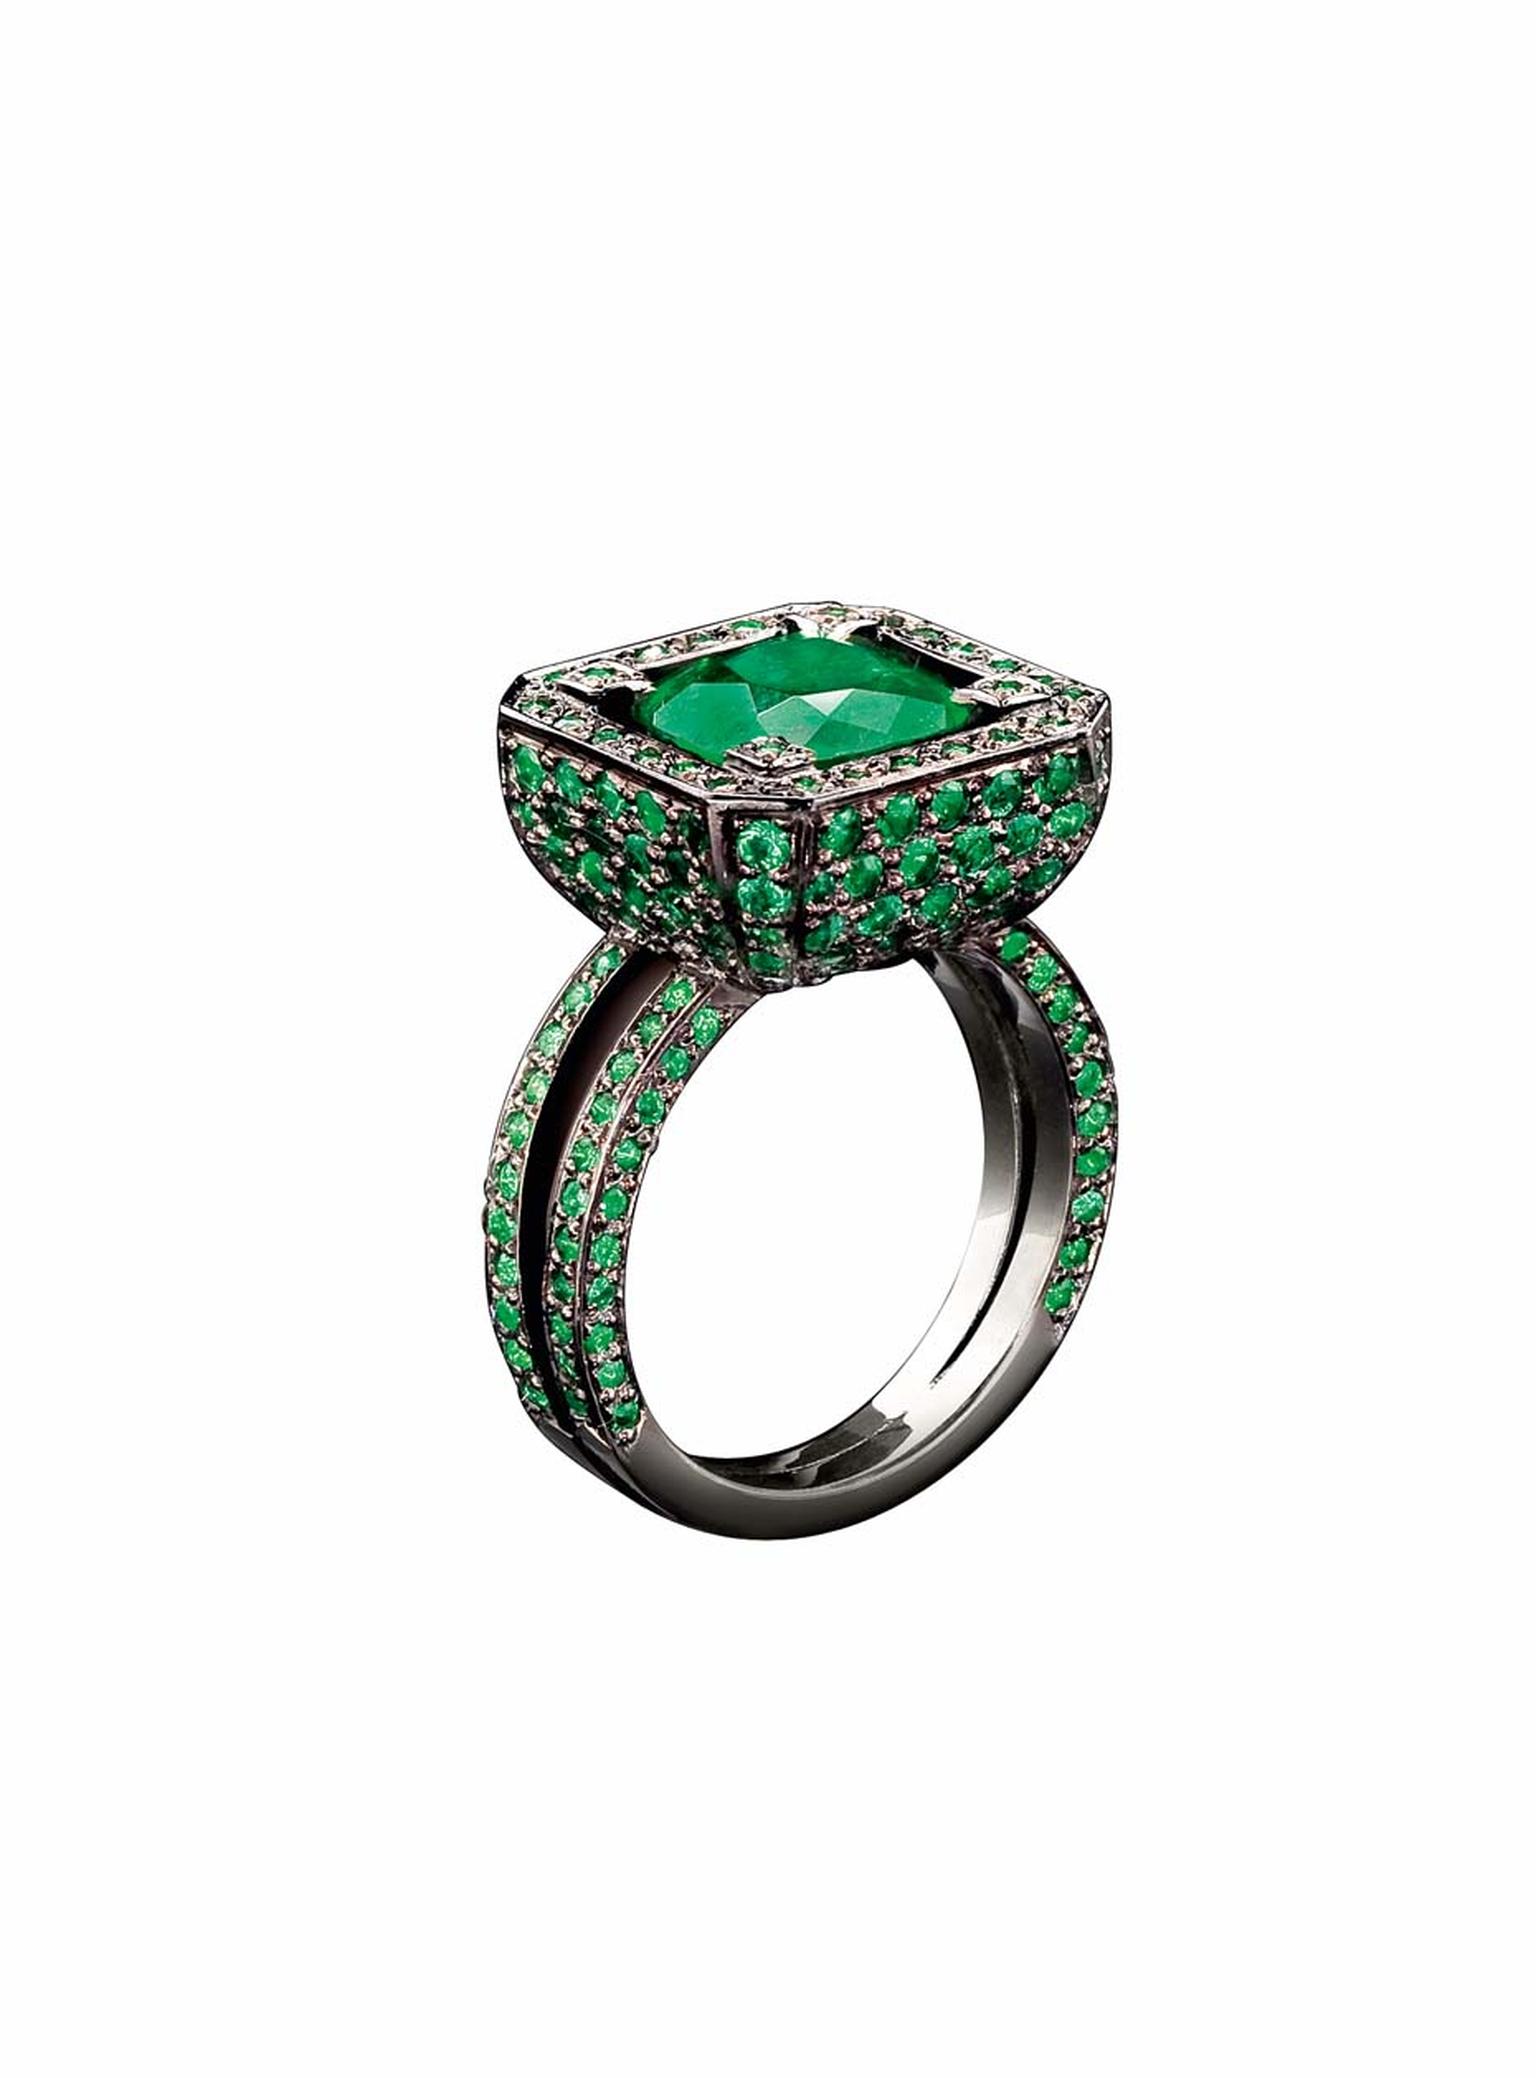 Solange Azagury-Partridge Cup ring with a central emerald, pavé set emerald "cup" body and emerald-set band in blackened white gold.